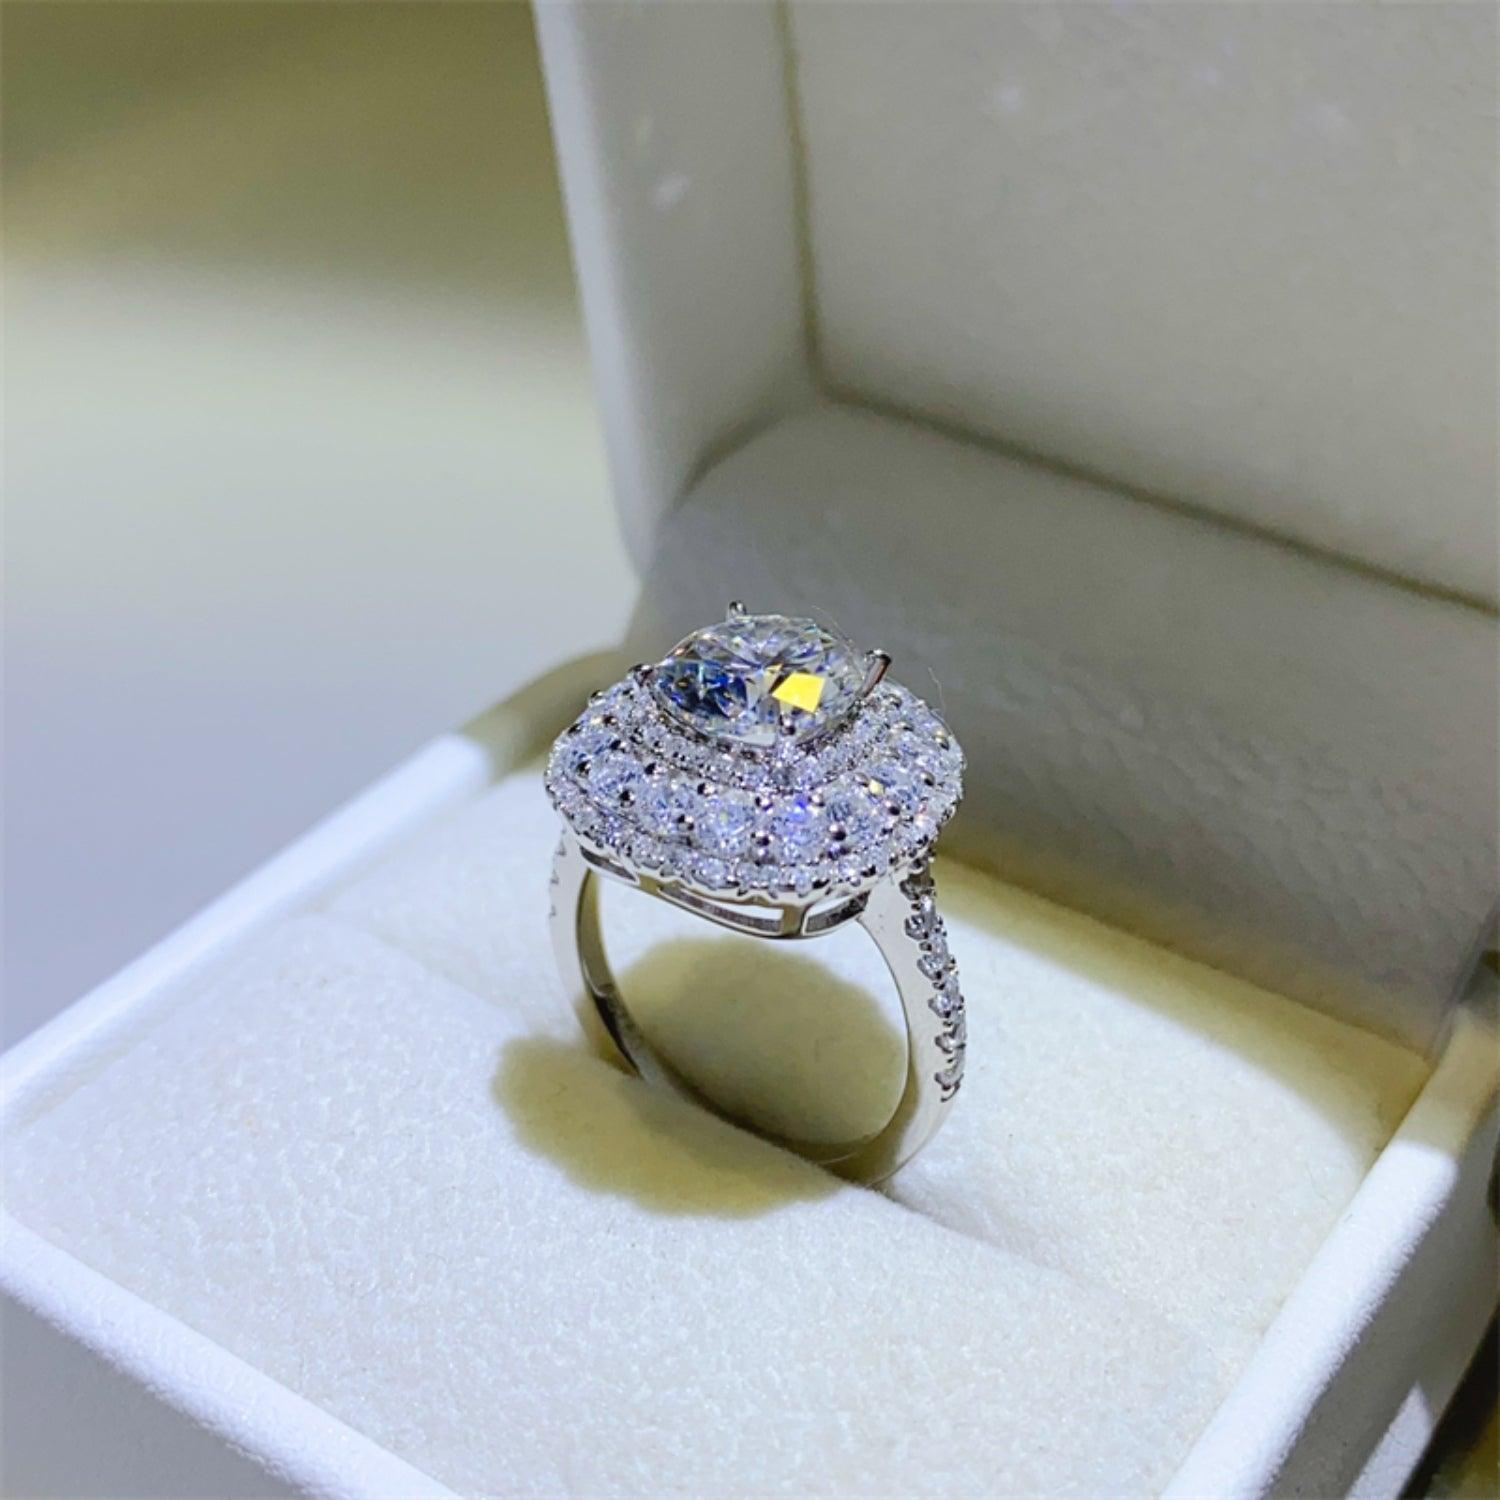 a ring with a blue center surrounded by white diamonds